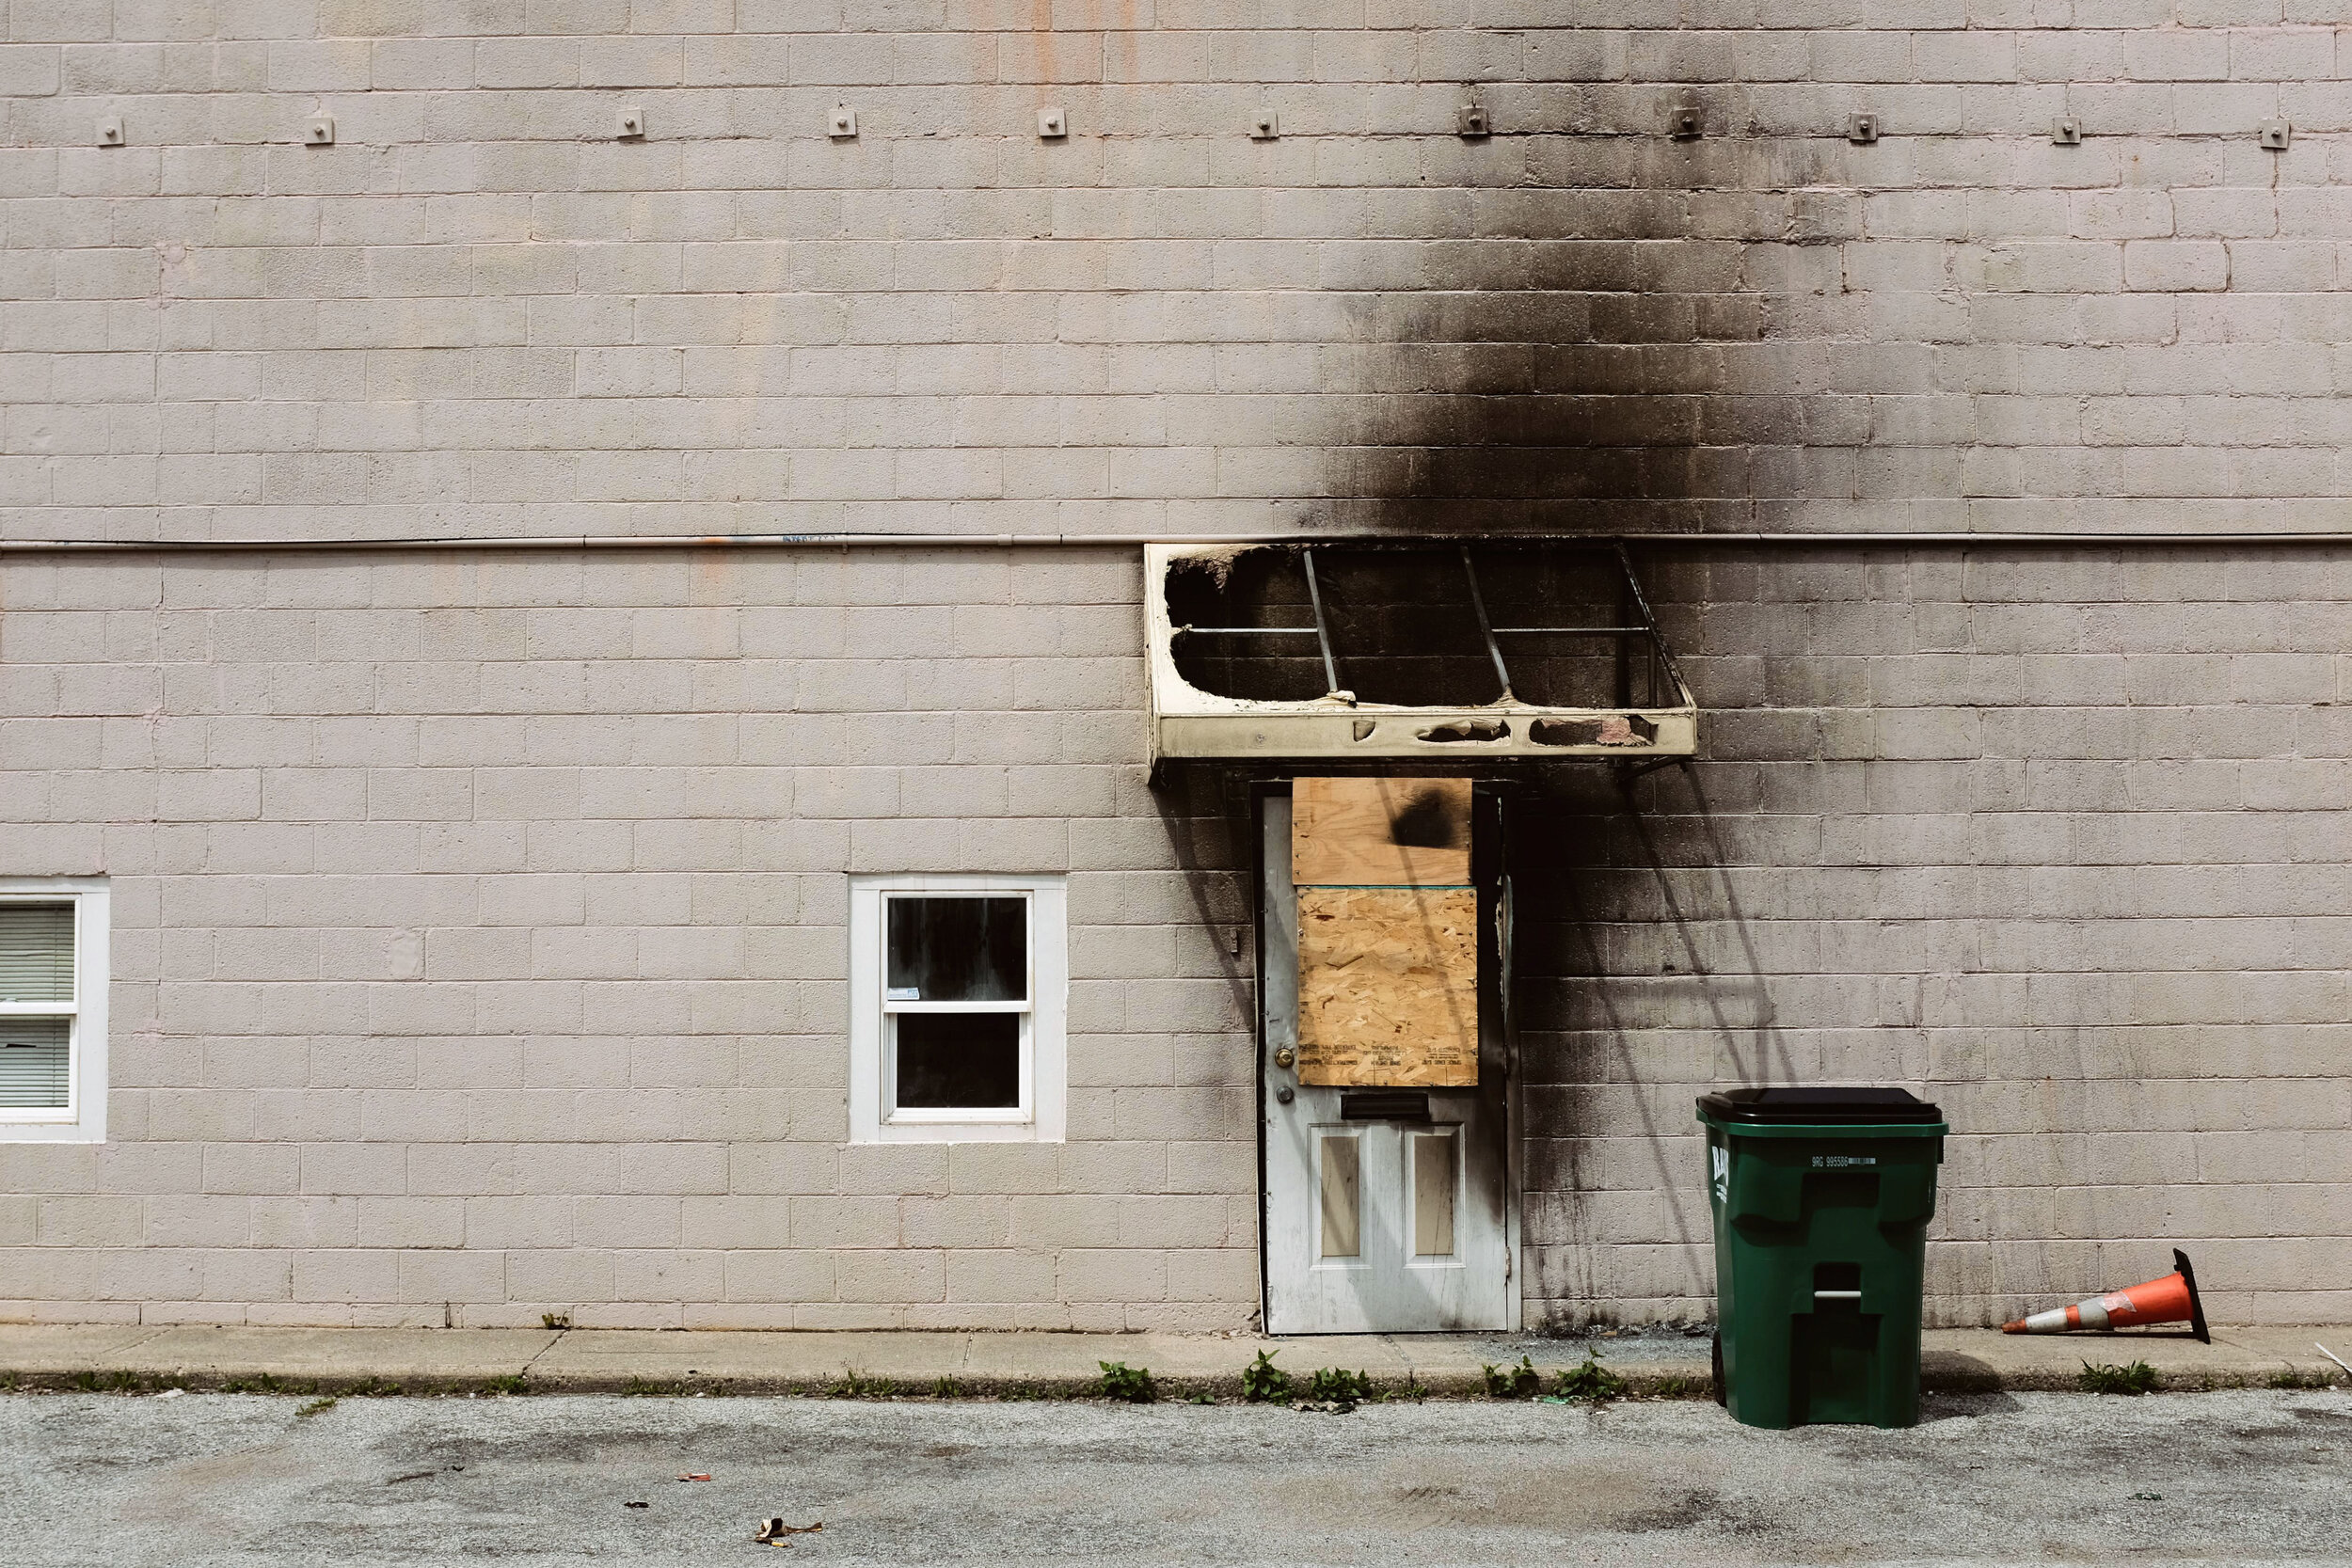  Burning down the house - Shot with Fuji X100F. 